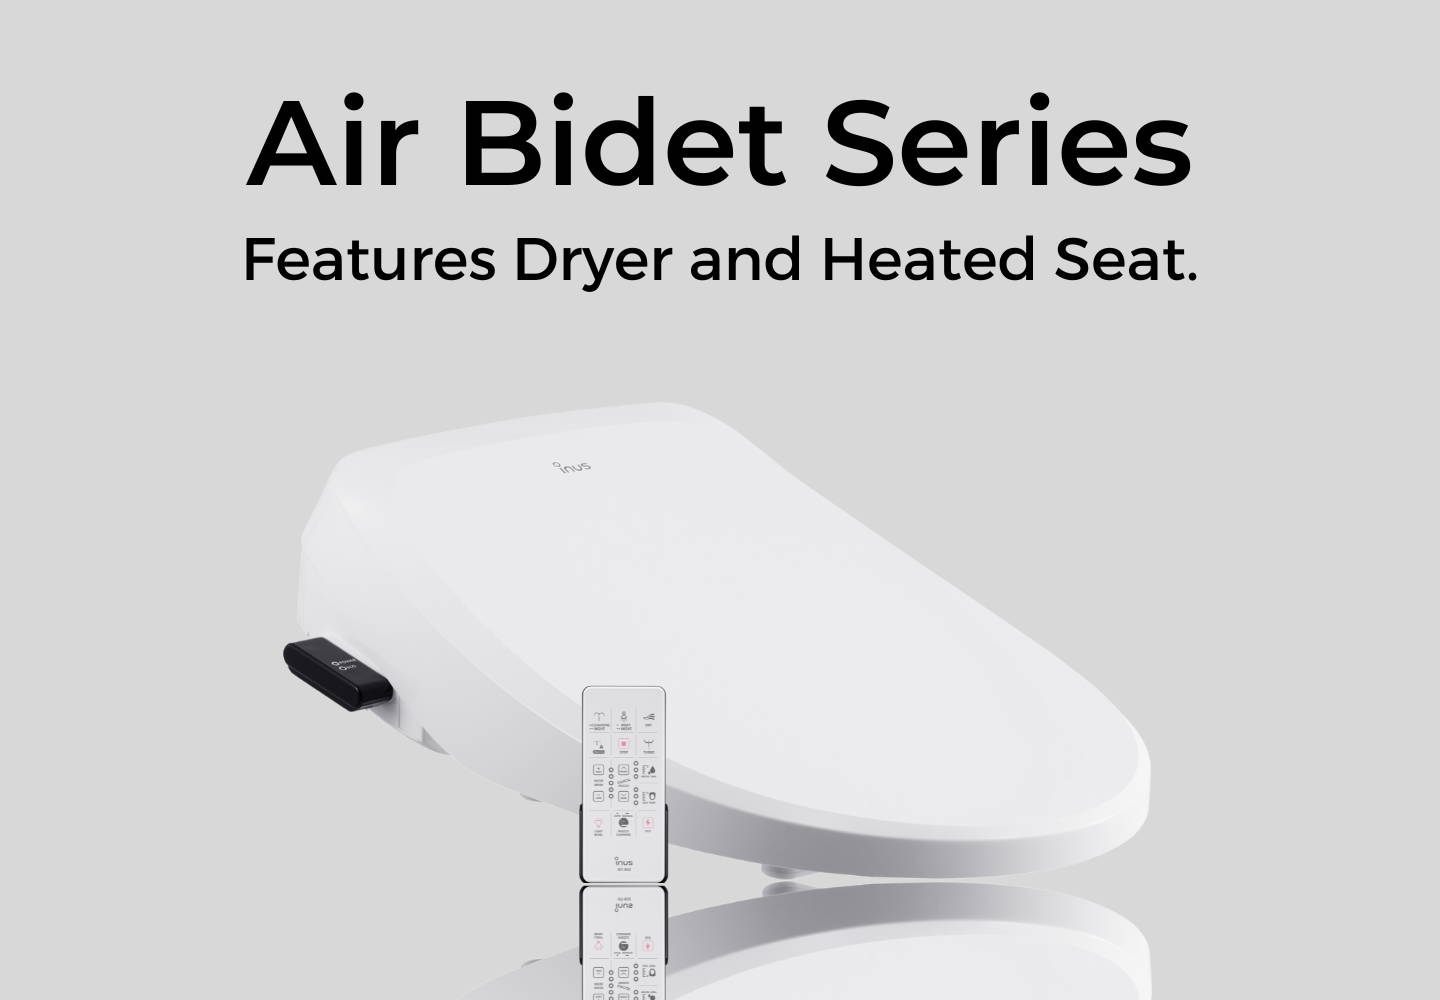 bidet with dryer, bidet with heated seat, self-cleansing nozzle, bide with remote